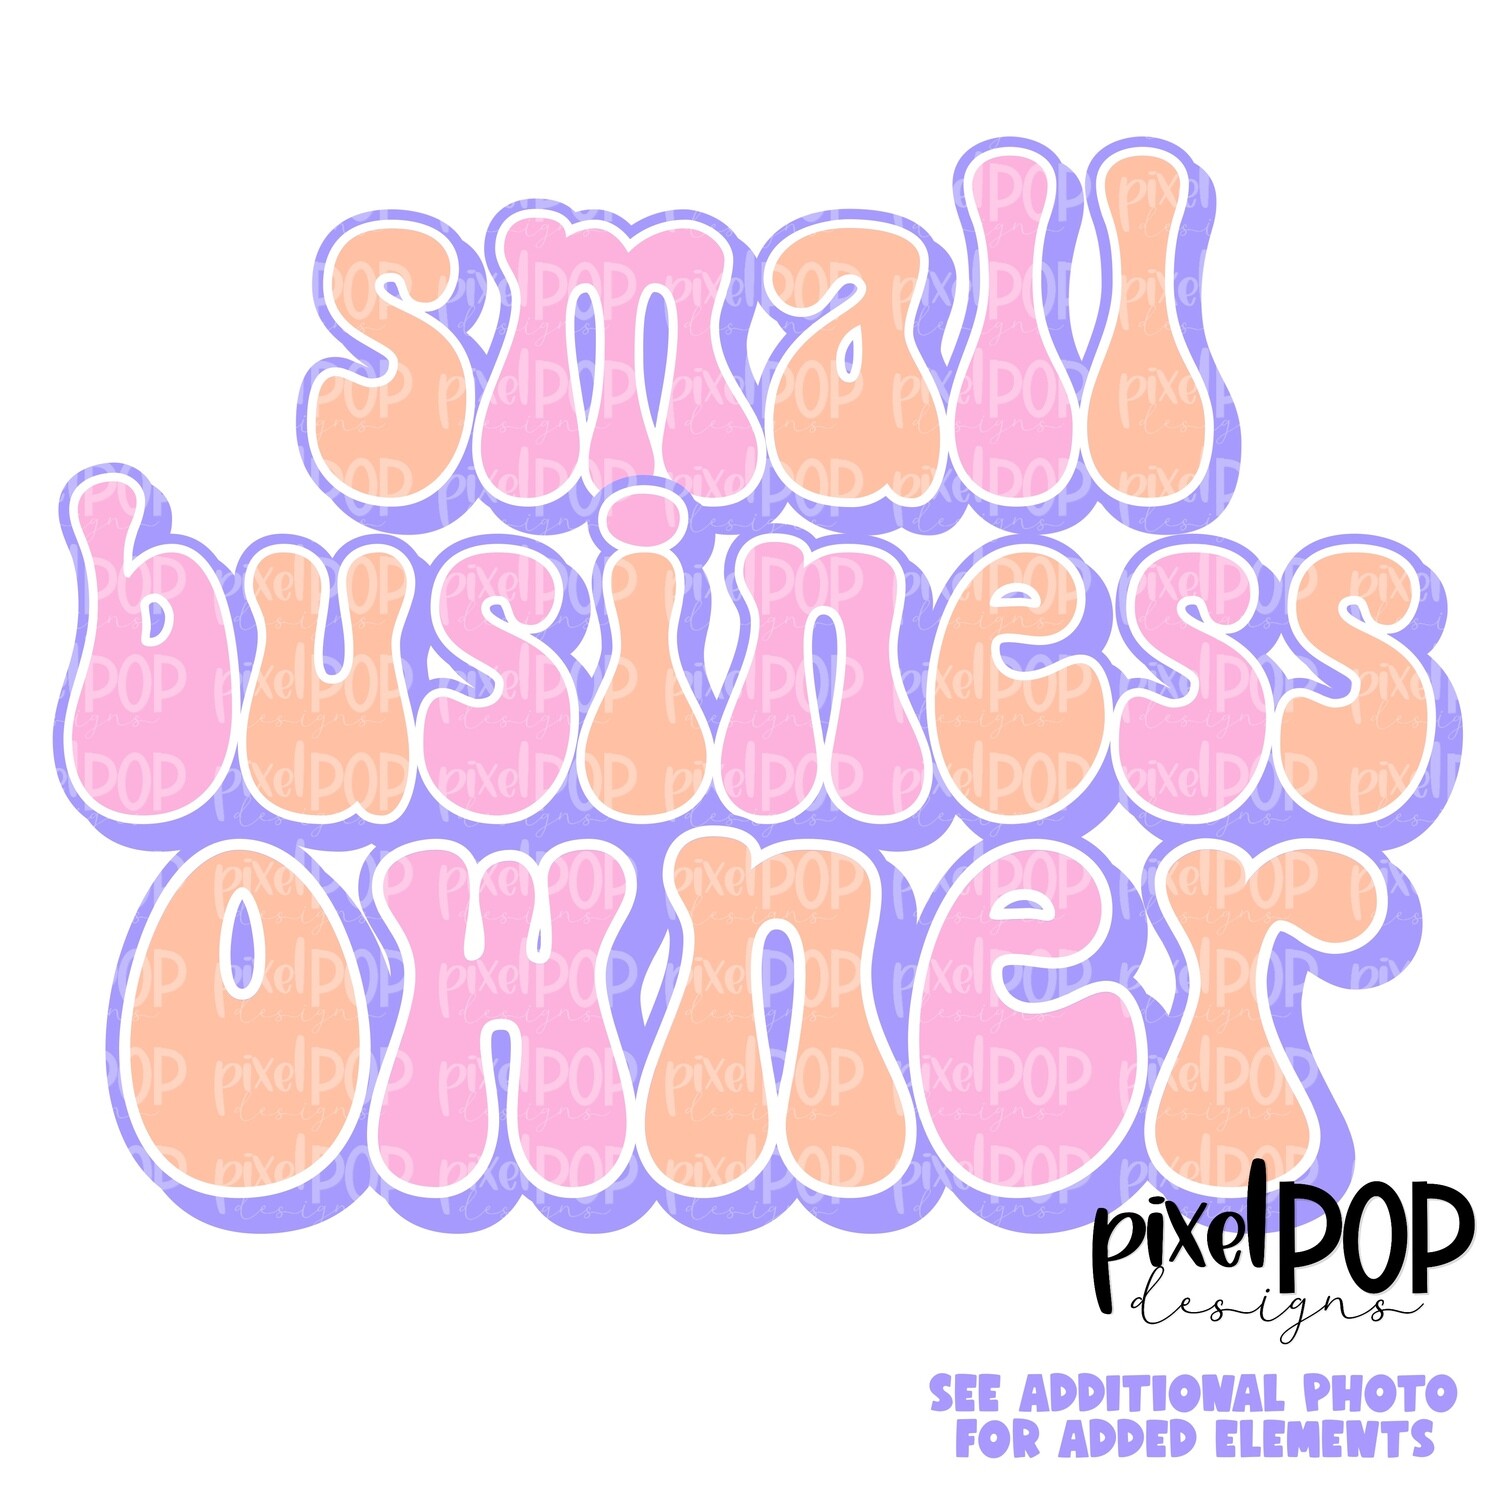 Retro Occupations Small Business Owner PNG Image Sublimation Art | Hand Drawn Art | Digital Design Download | Clipart